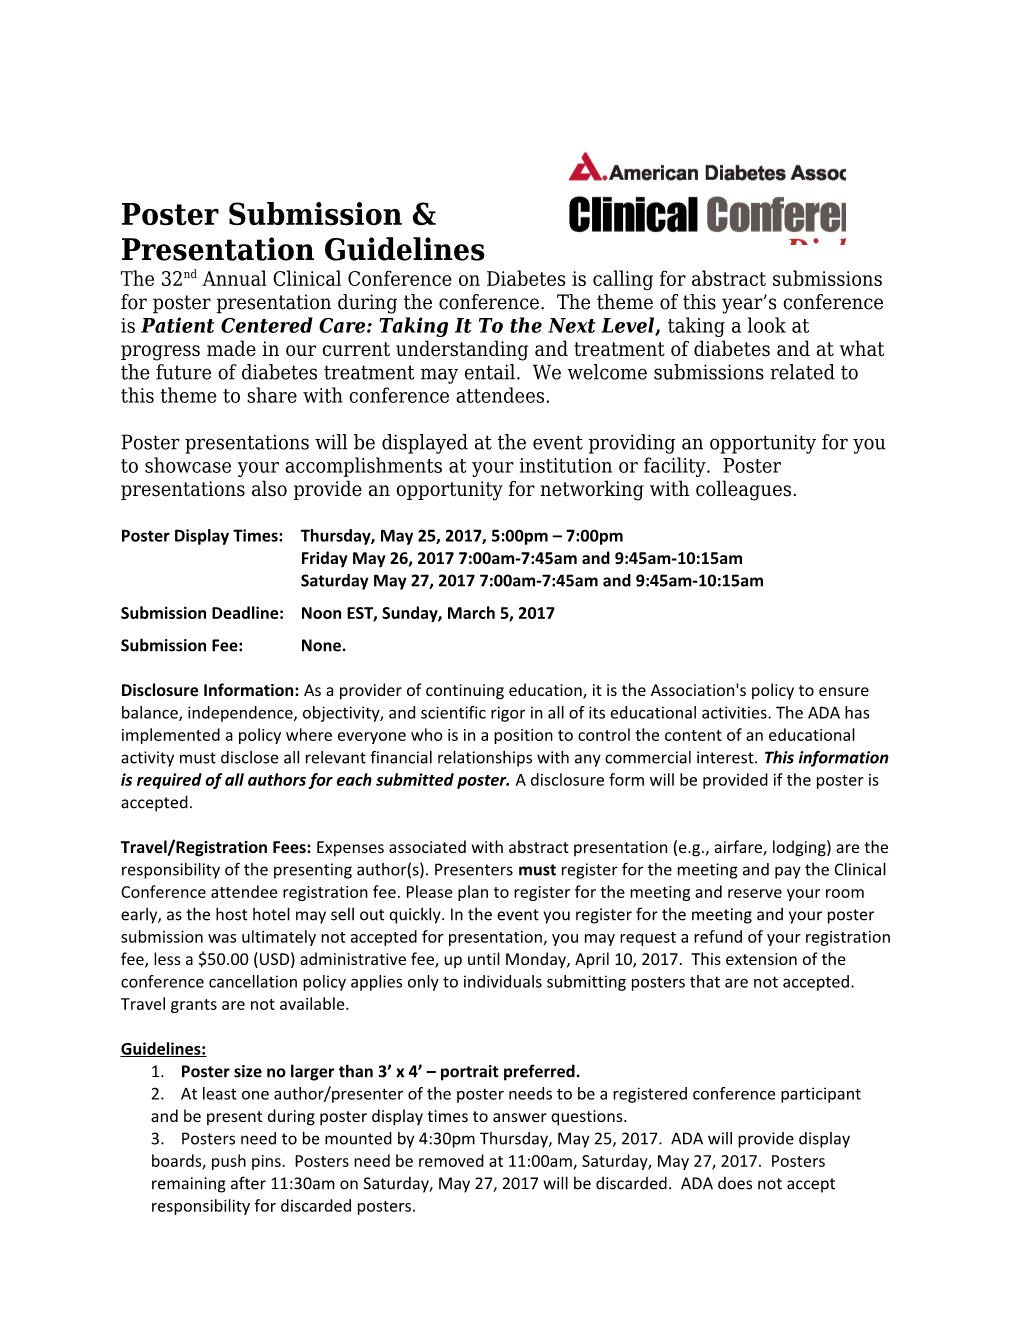 Poster Submission & Presentationguidelines